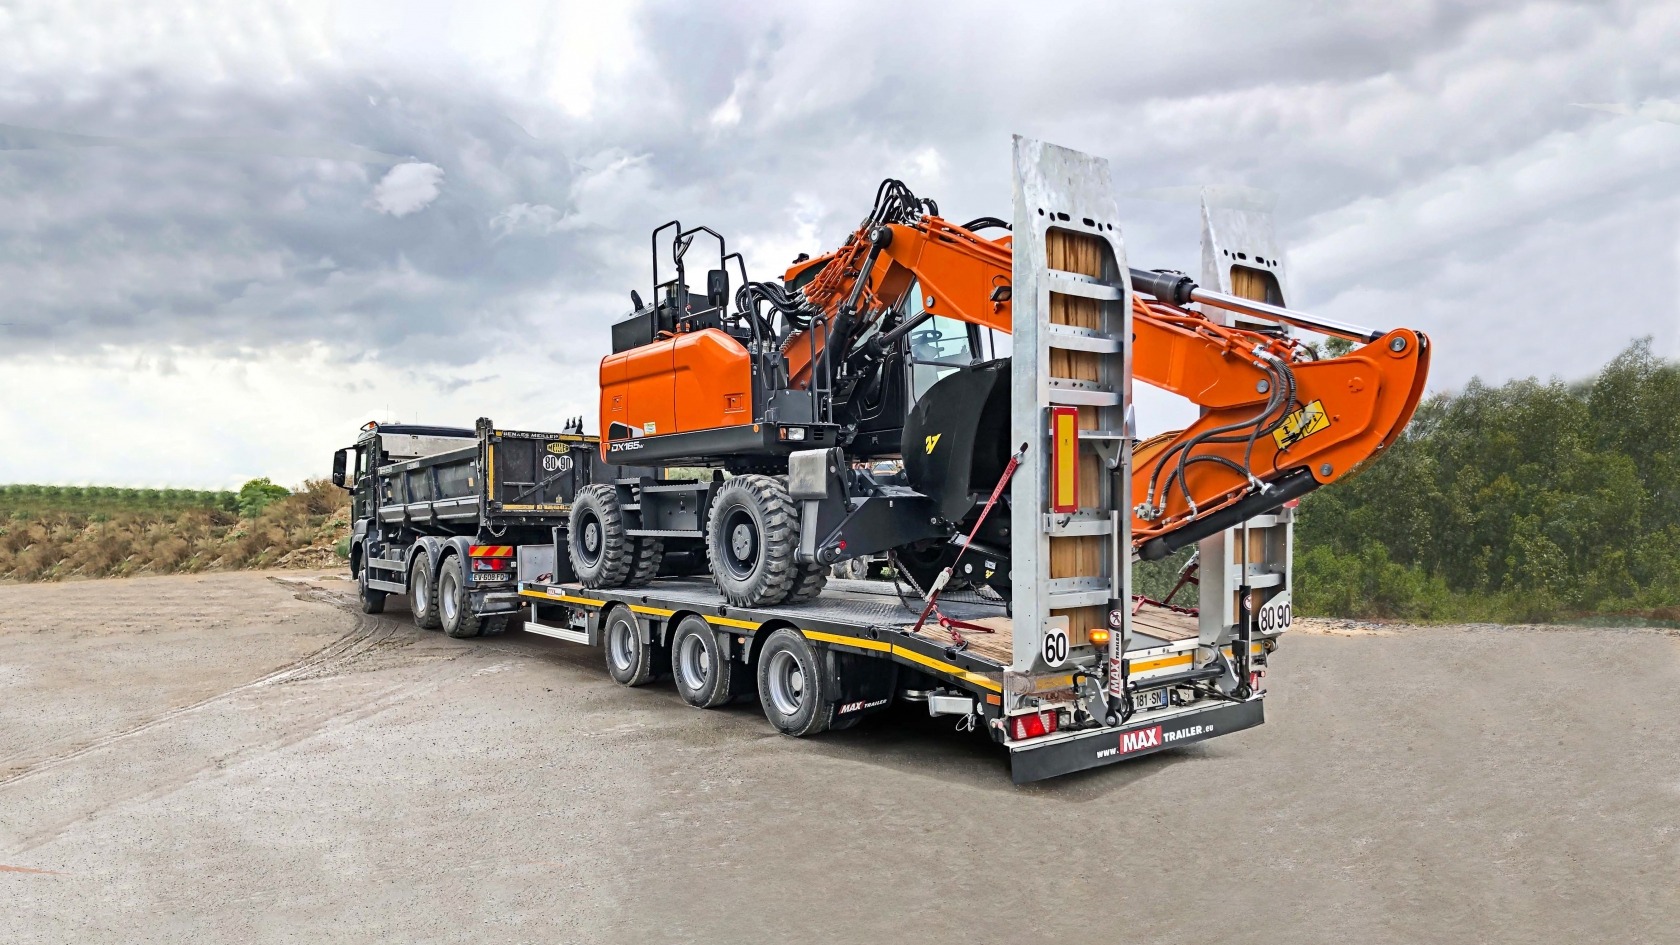 Trailer MAX300 carrying an excavator